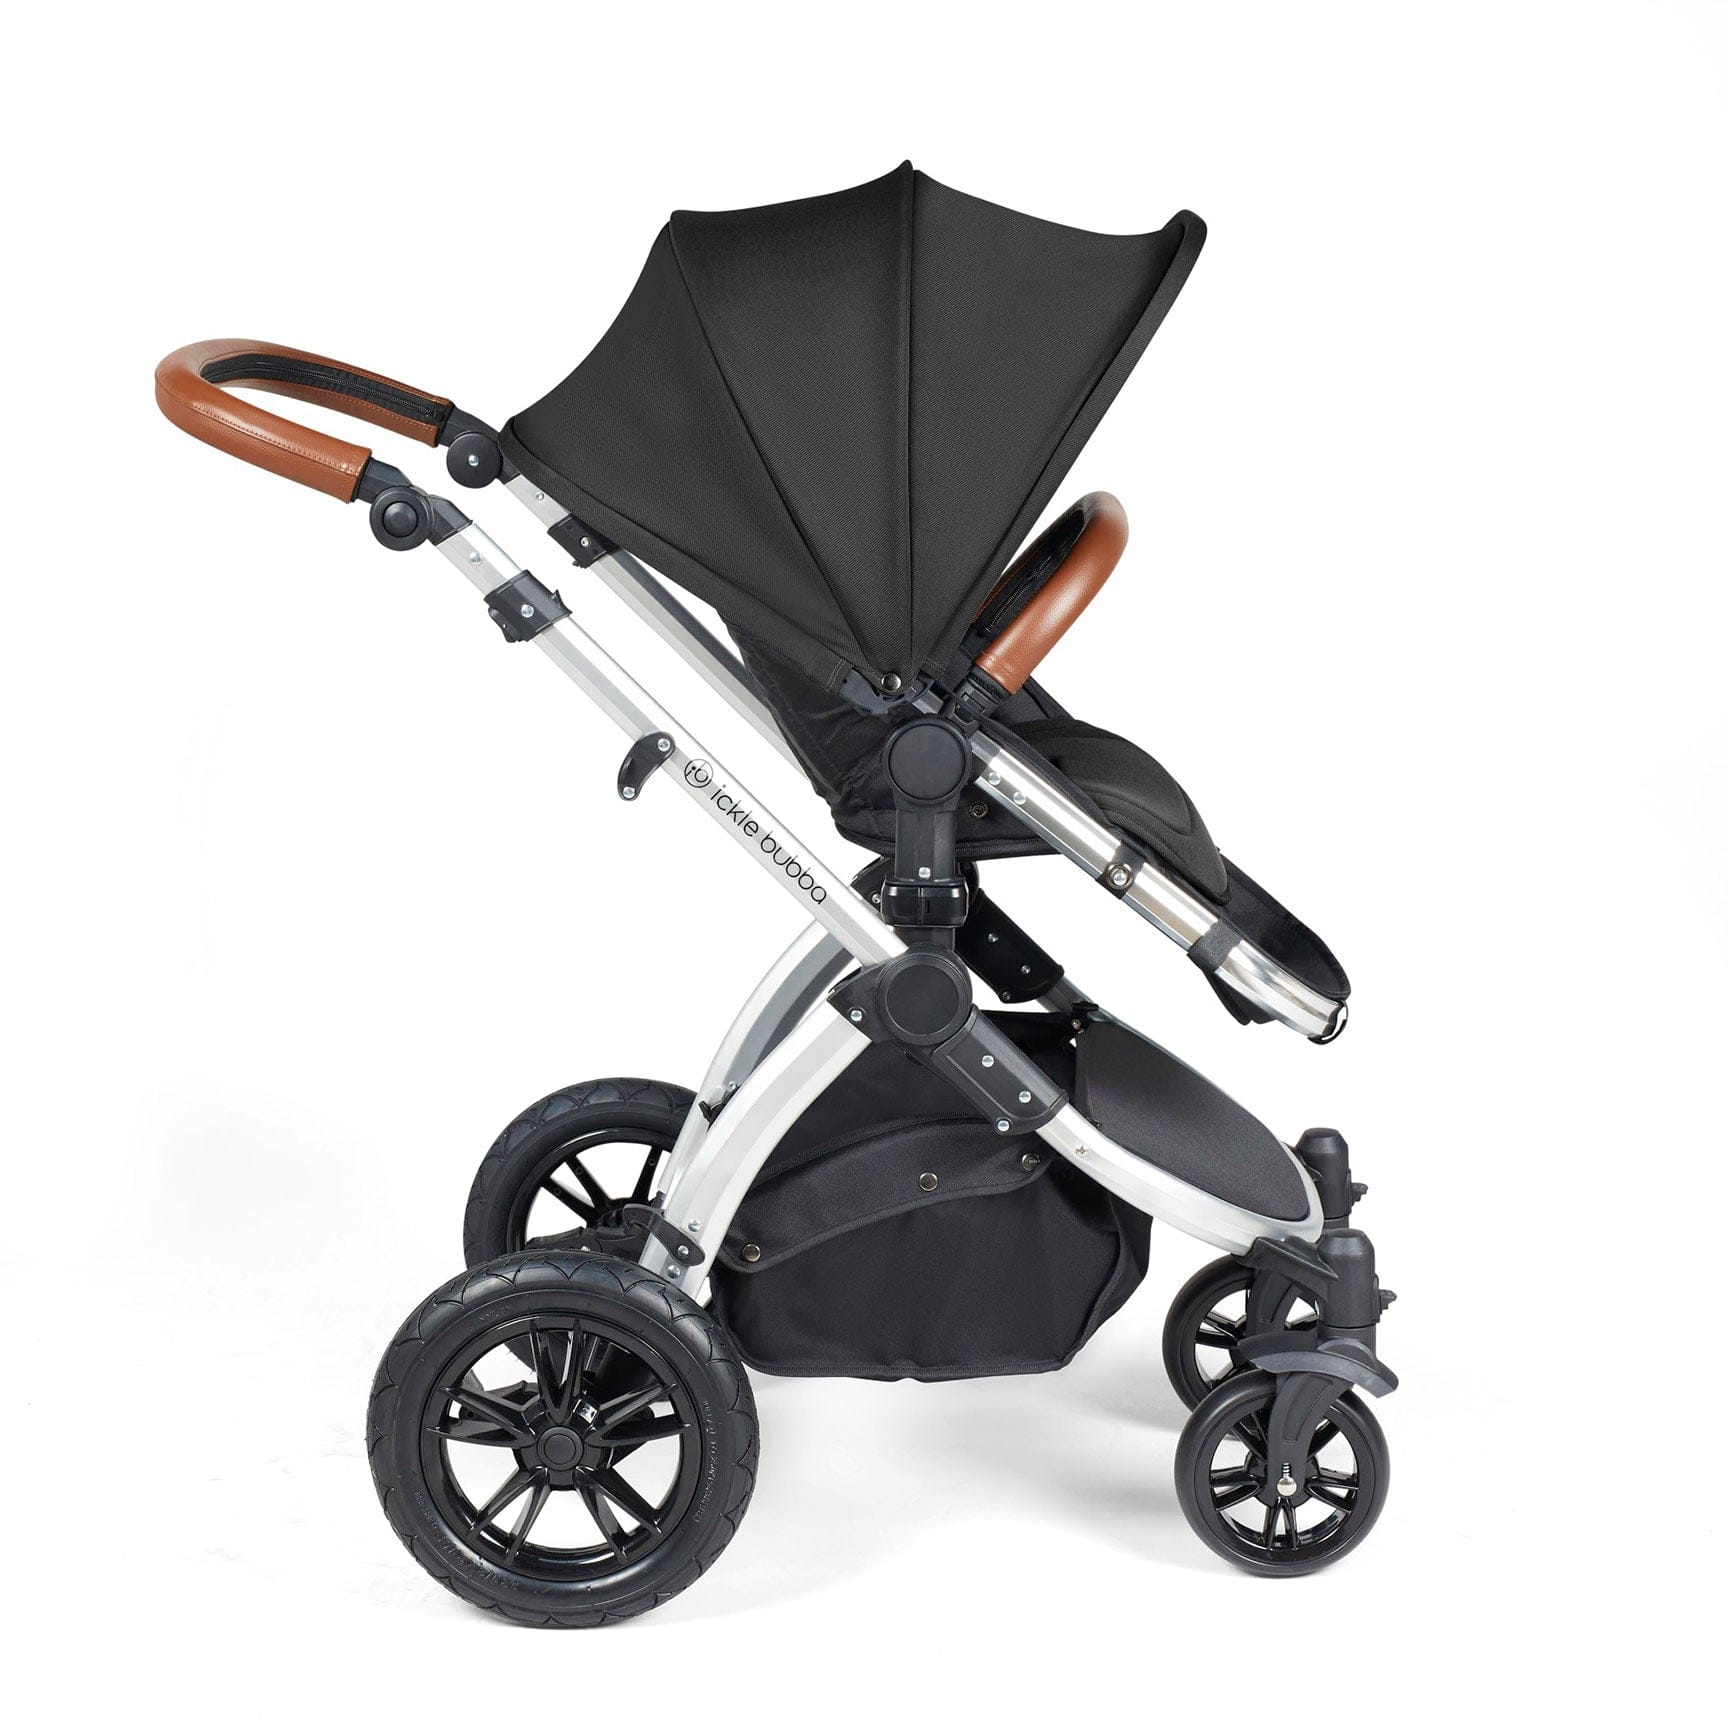 Ickle Bubba Stomp Luxe All-in-One Travel System with Isofix Base in Silver/Midnight/Tan Travel Systems 10-011-300-250 5056515026528